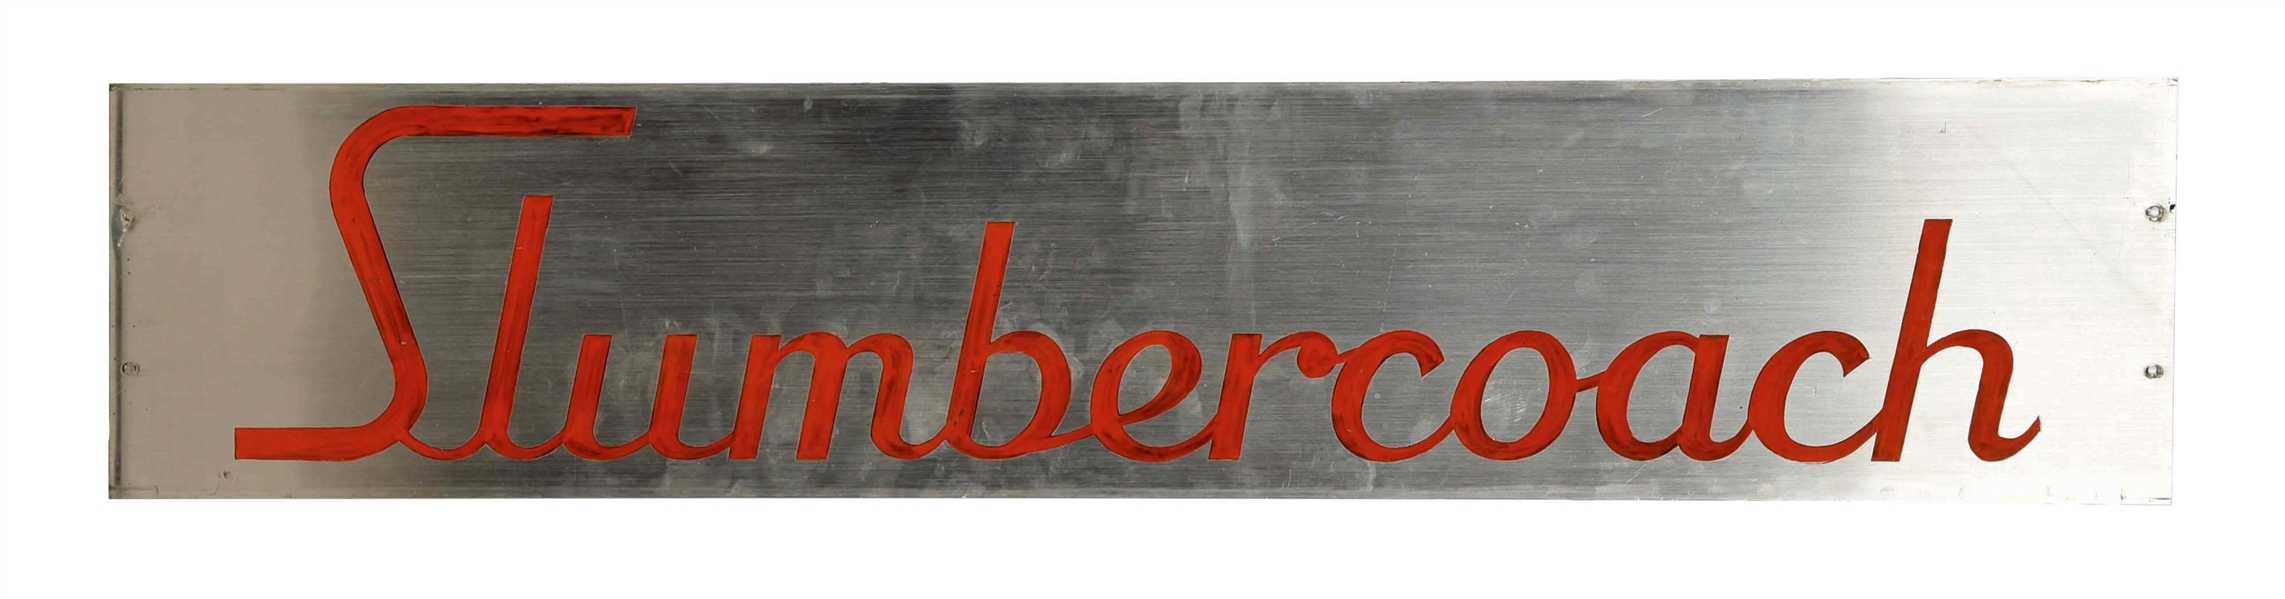 SLUMBERCOACH STAINLESS STEEL SIGN.